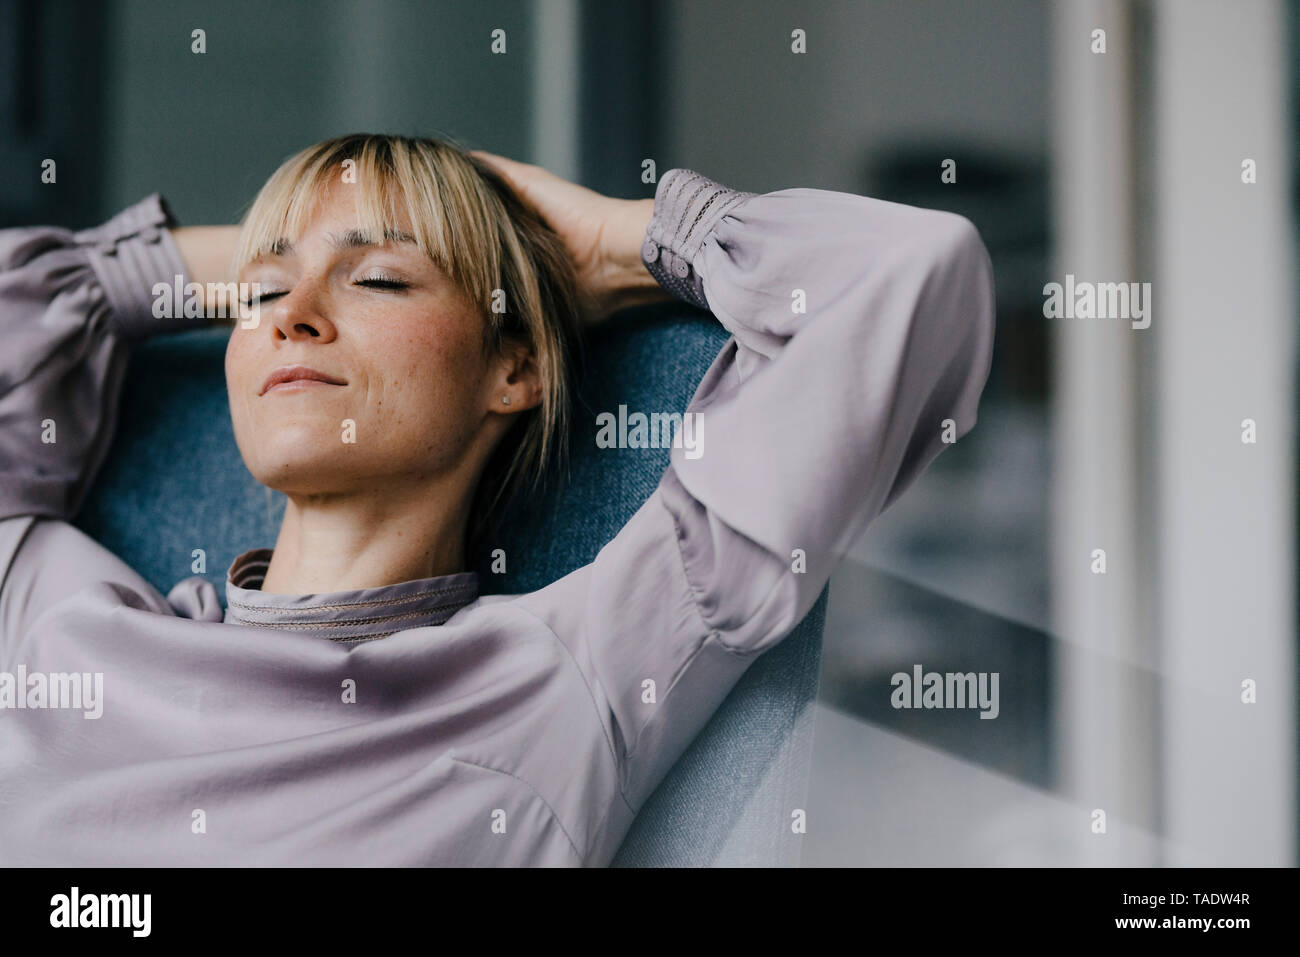 Blond woman relaxing in armchair, with hands behind head Stock Photo